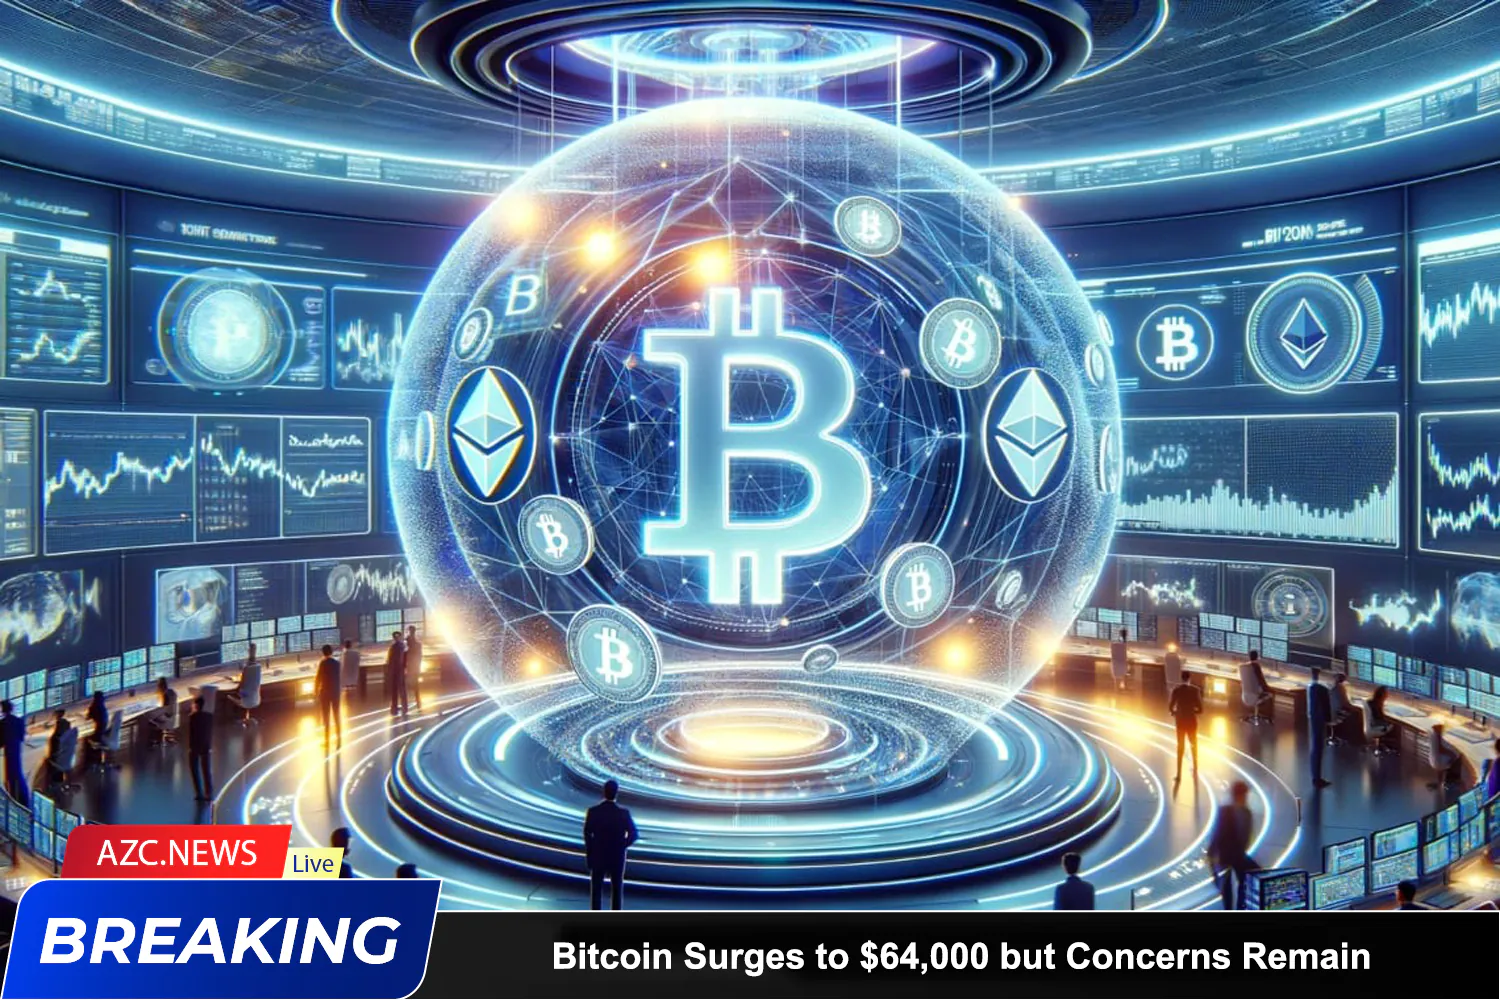 Azcnews Bitcoin Surges To $64,000 But Concerns Remain